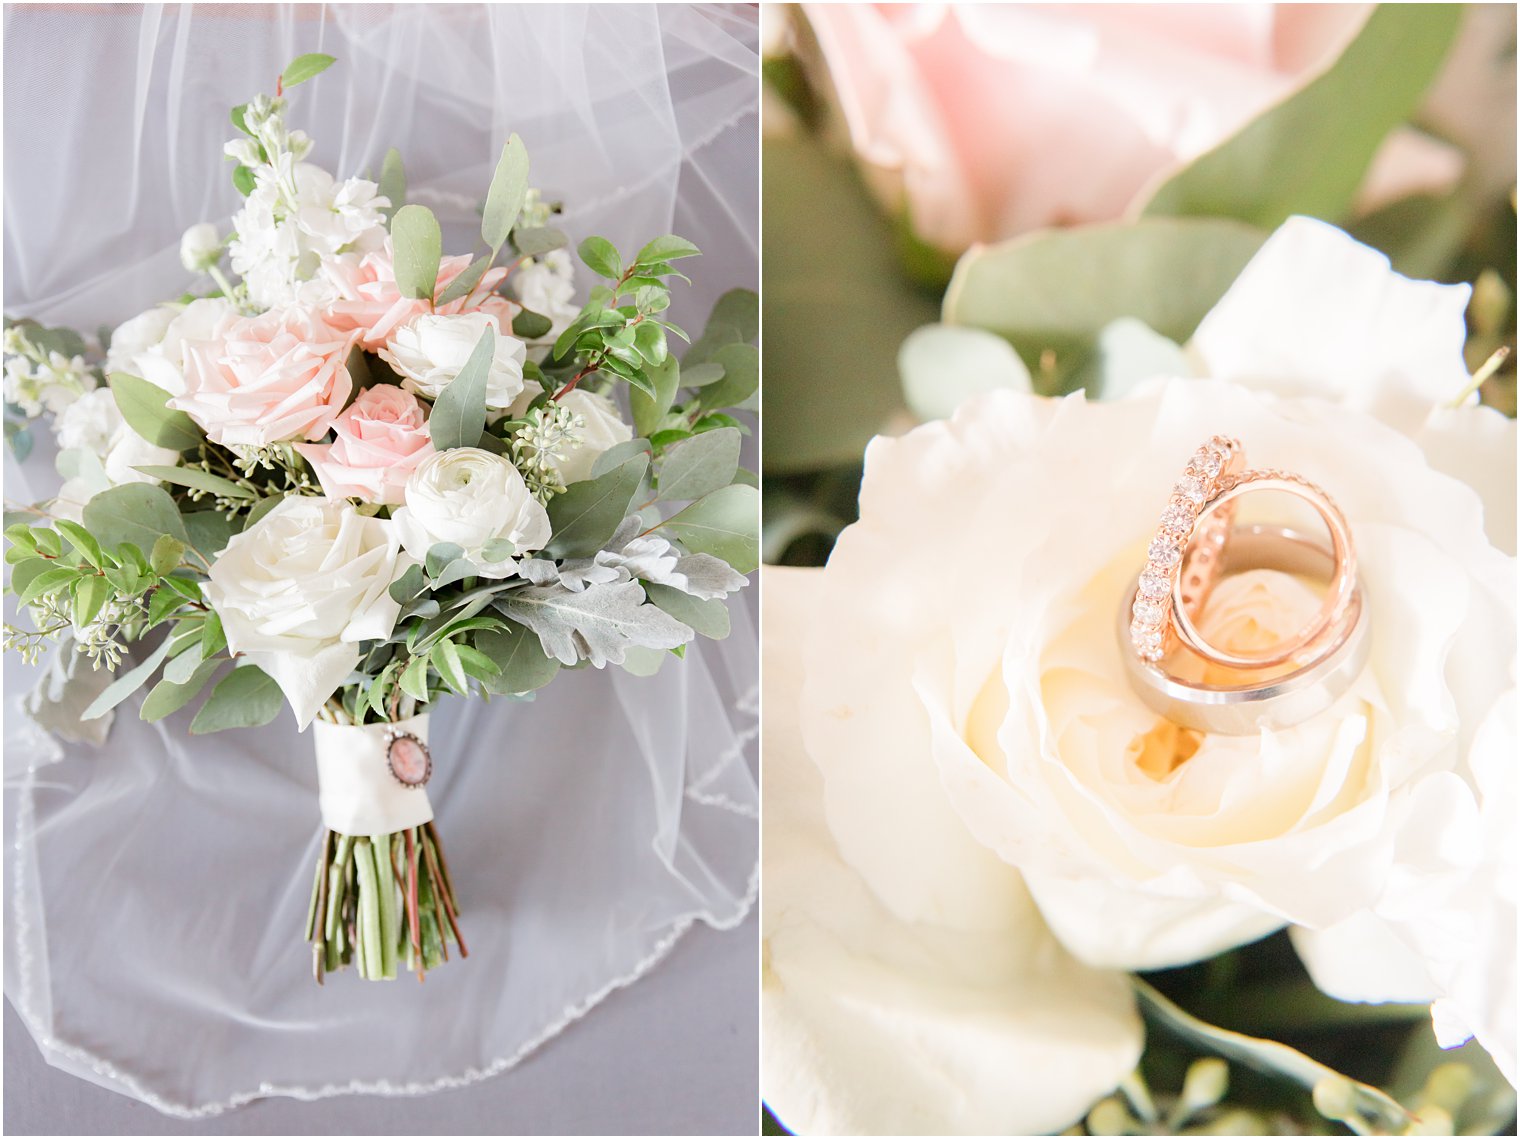 Elegant pastel pink and ivory rose bouquet by Bespoke Floral photographed by Idalia Photography